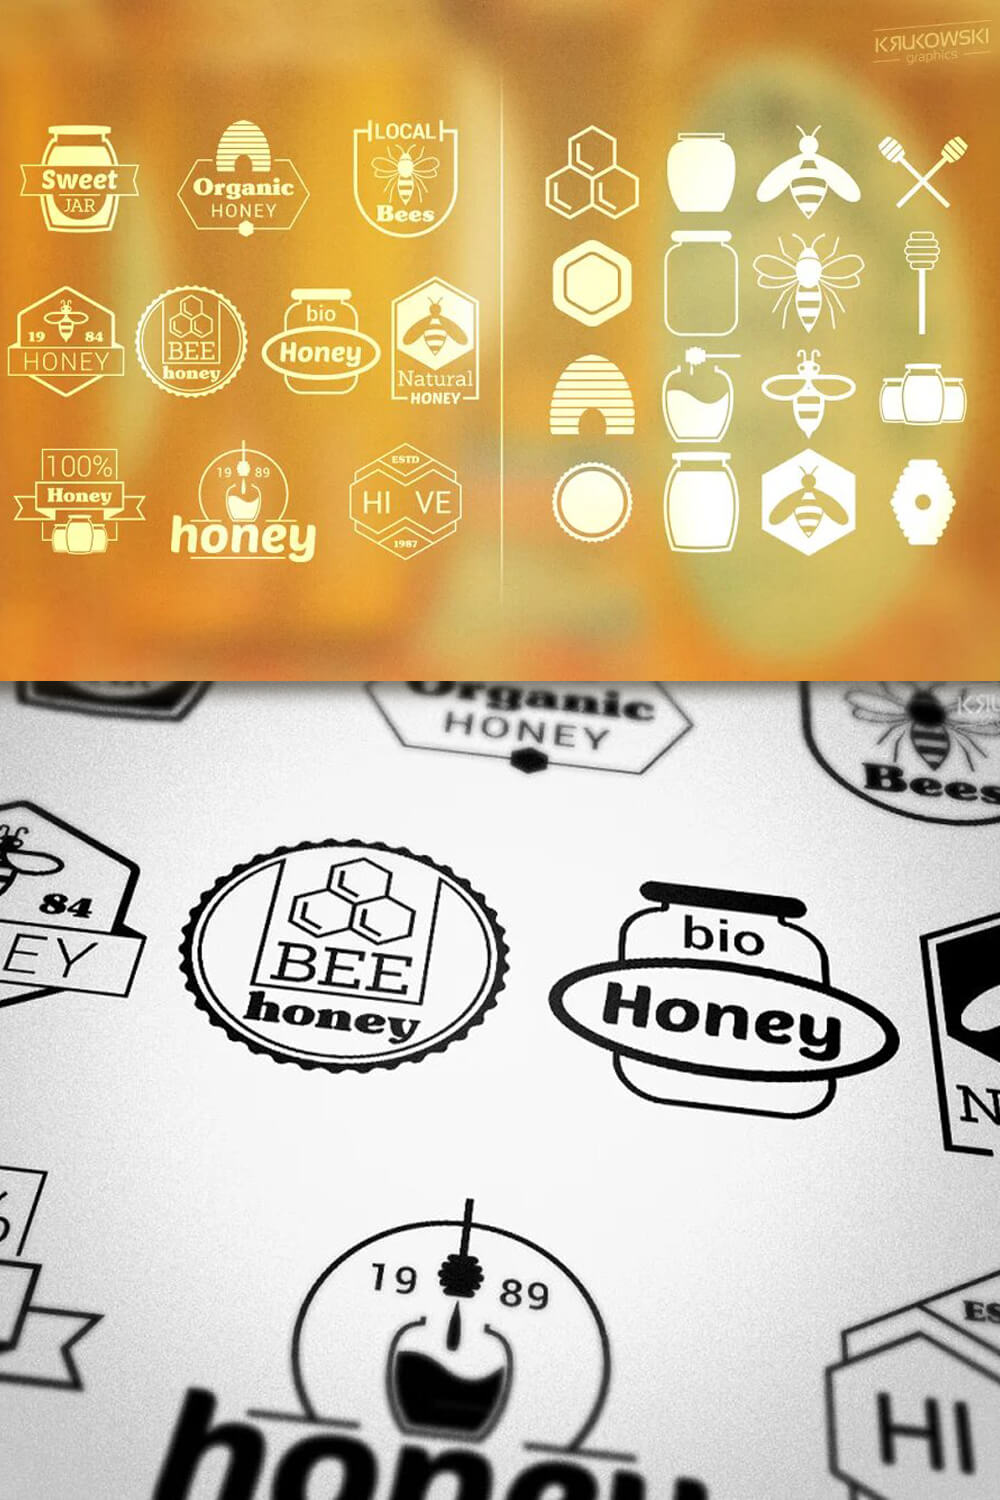 Two variants of the image of the honey logos on a white and orange background.